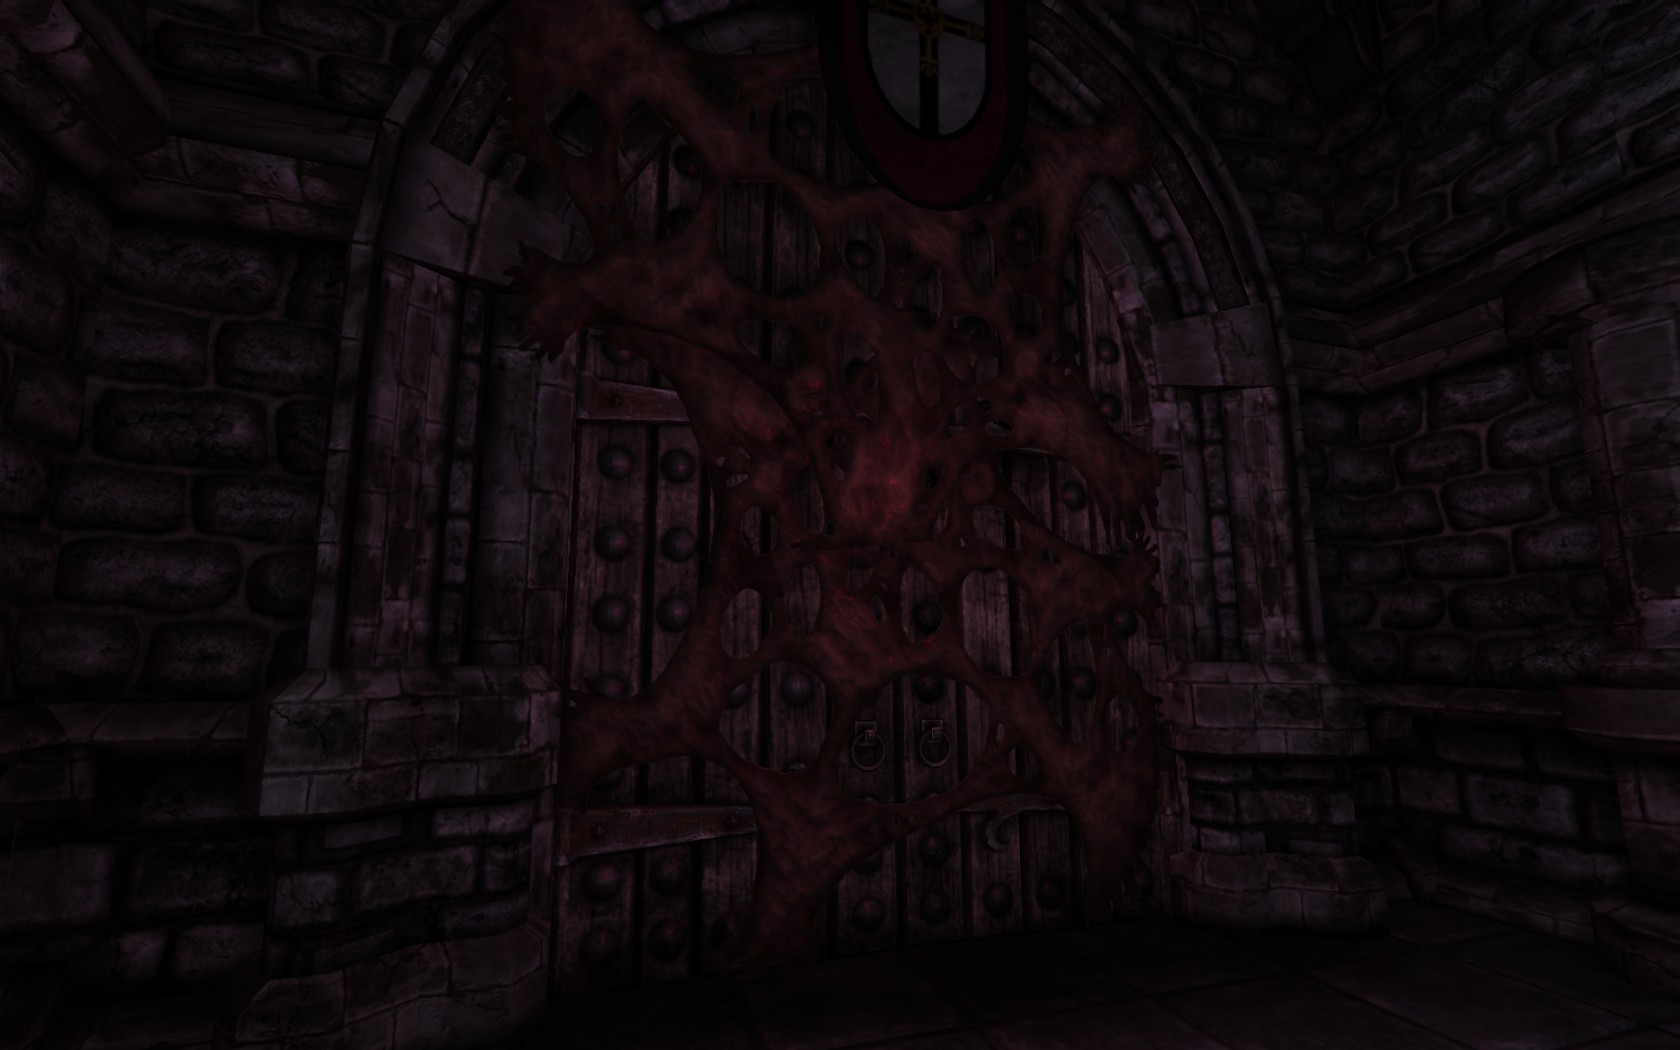 Two giant wooden doors are covered in a red, fleshy substance like a spiderweb.